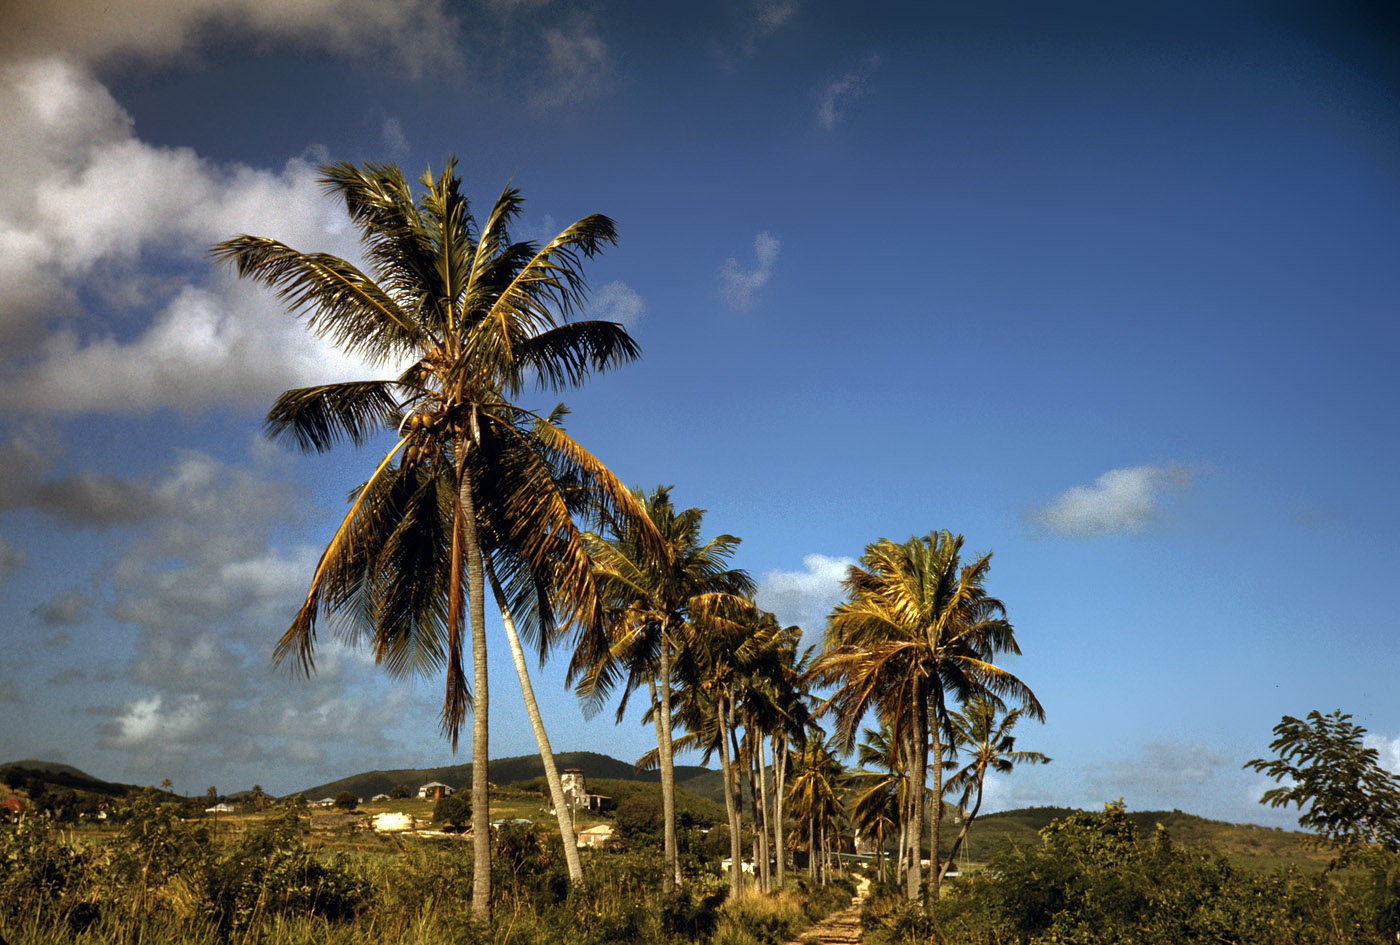 December 1941. Another image from Jack Delano's Caribbean assignment. "Farm road near one of the villages on the northern coast of St. Croix, Virgin Islands." View full size. 35mm Kodachrome transparency by Jack Delano for the FSA.